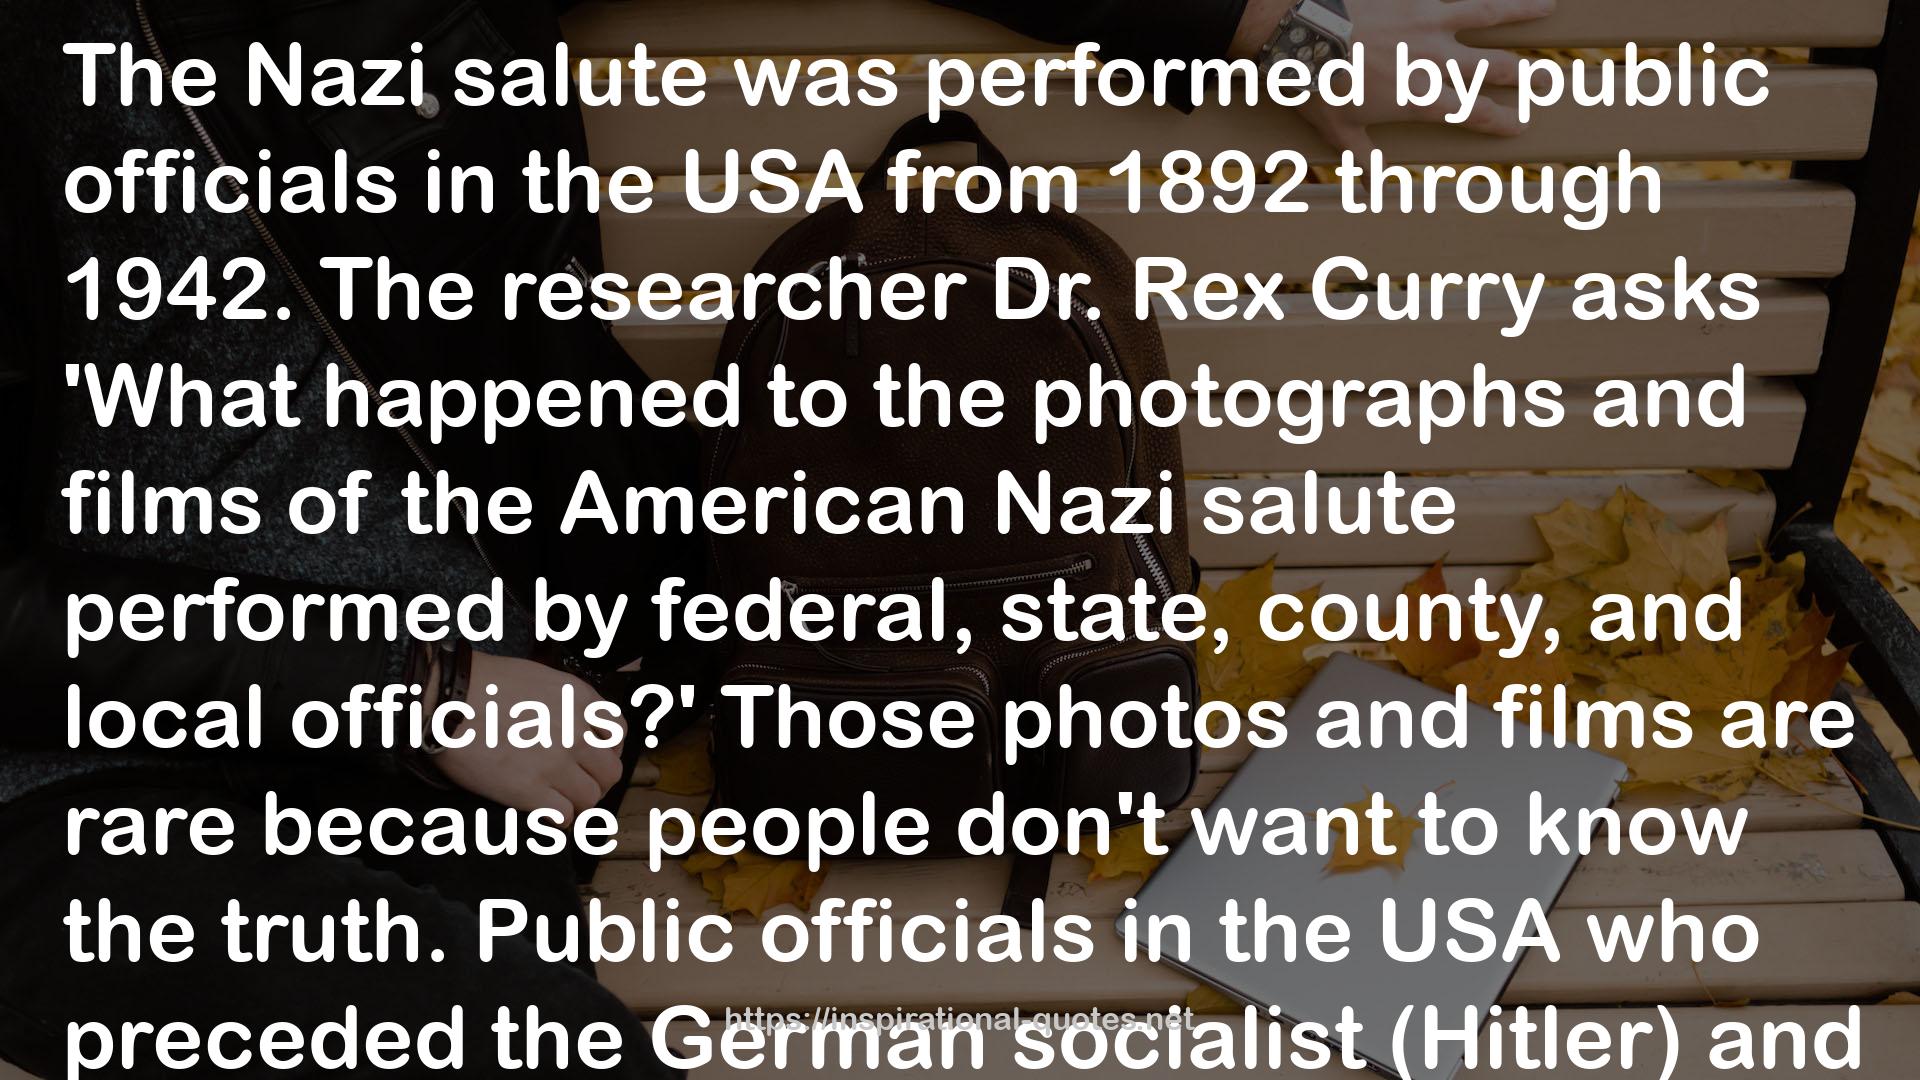 Lies My Teacher Told Me: Swastikas, Nazis, Pledge of Allegiance Lies Exposed by Rex Curry and Francis & Edward Bellamy QUOTES